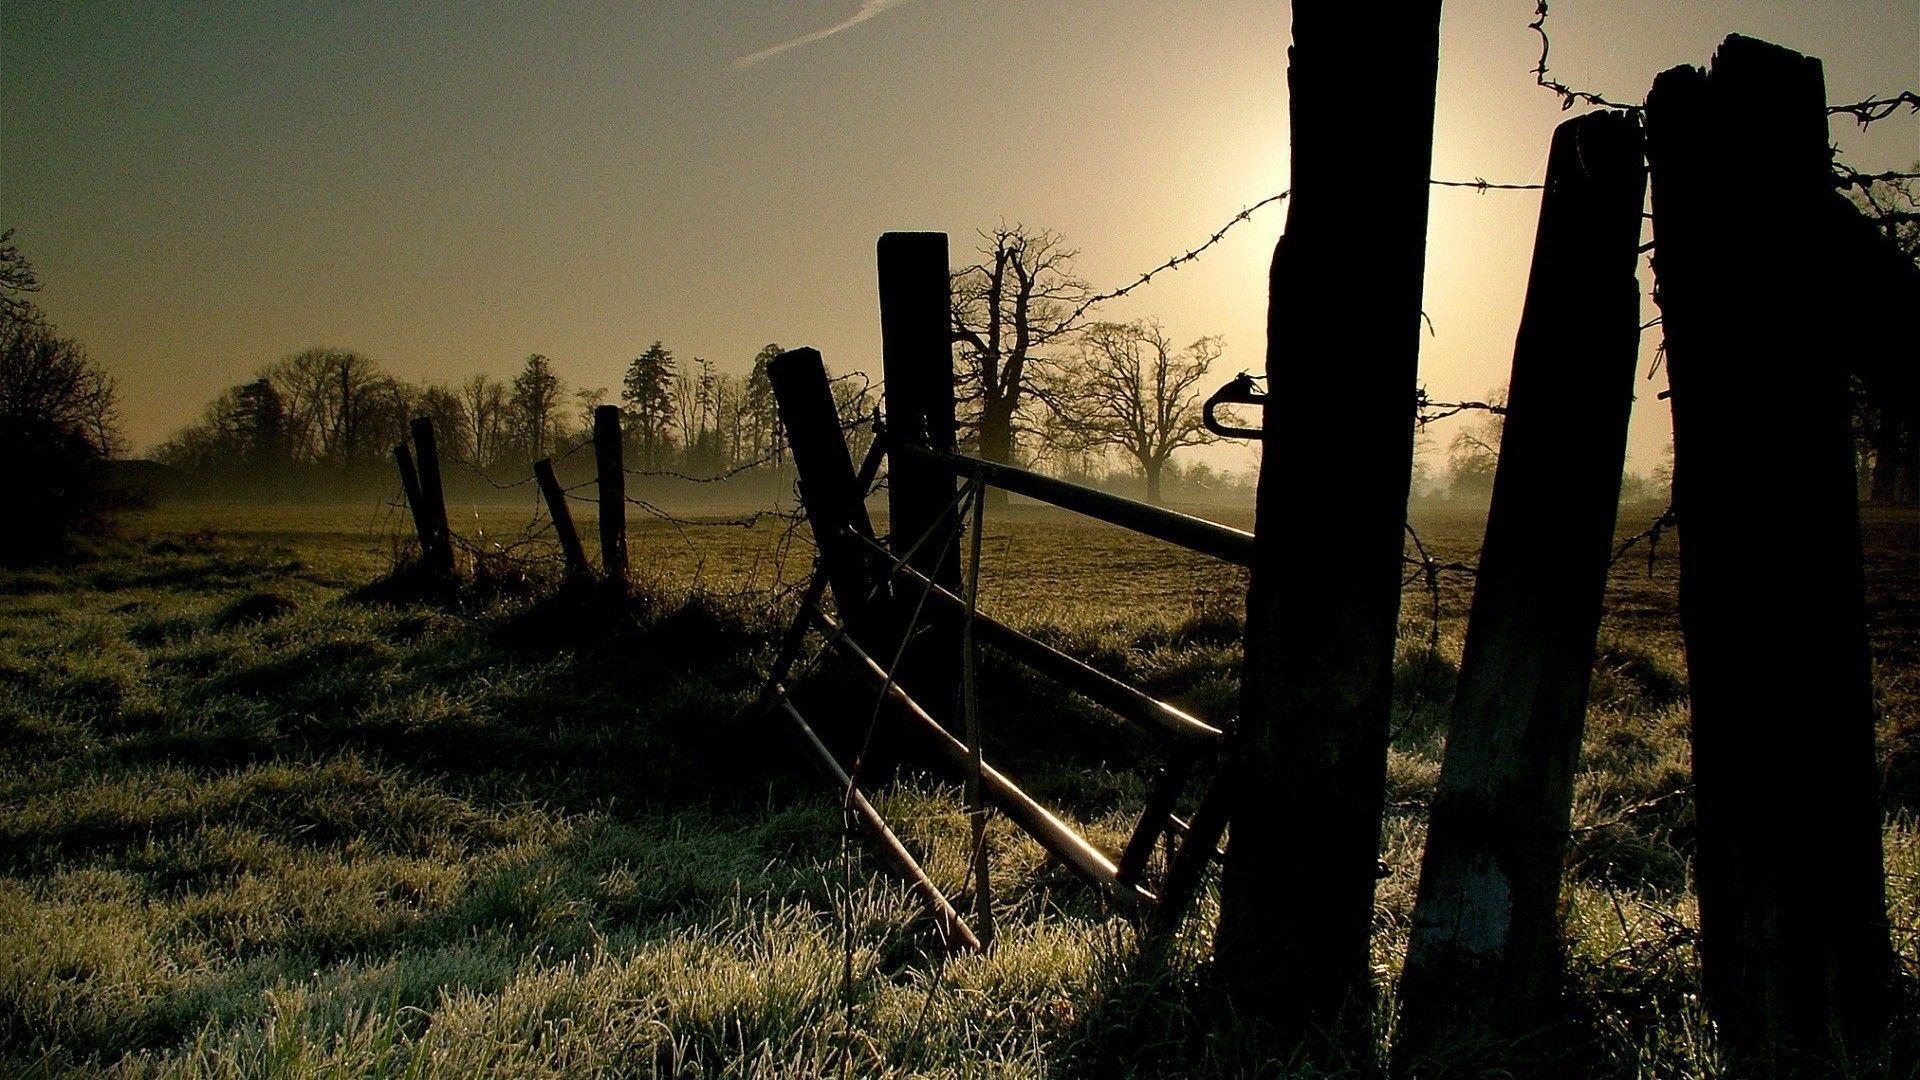 The Image of Fences Barbed Wire Fresh HD Wallpaper at